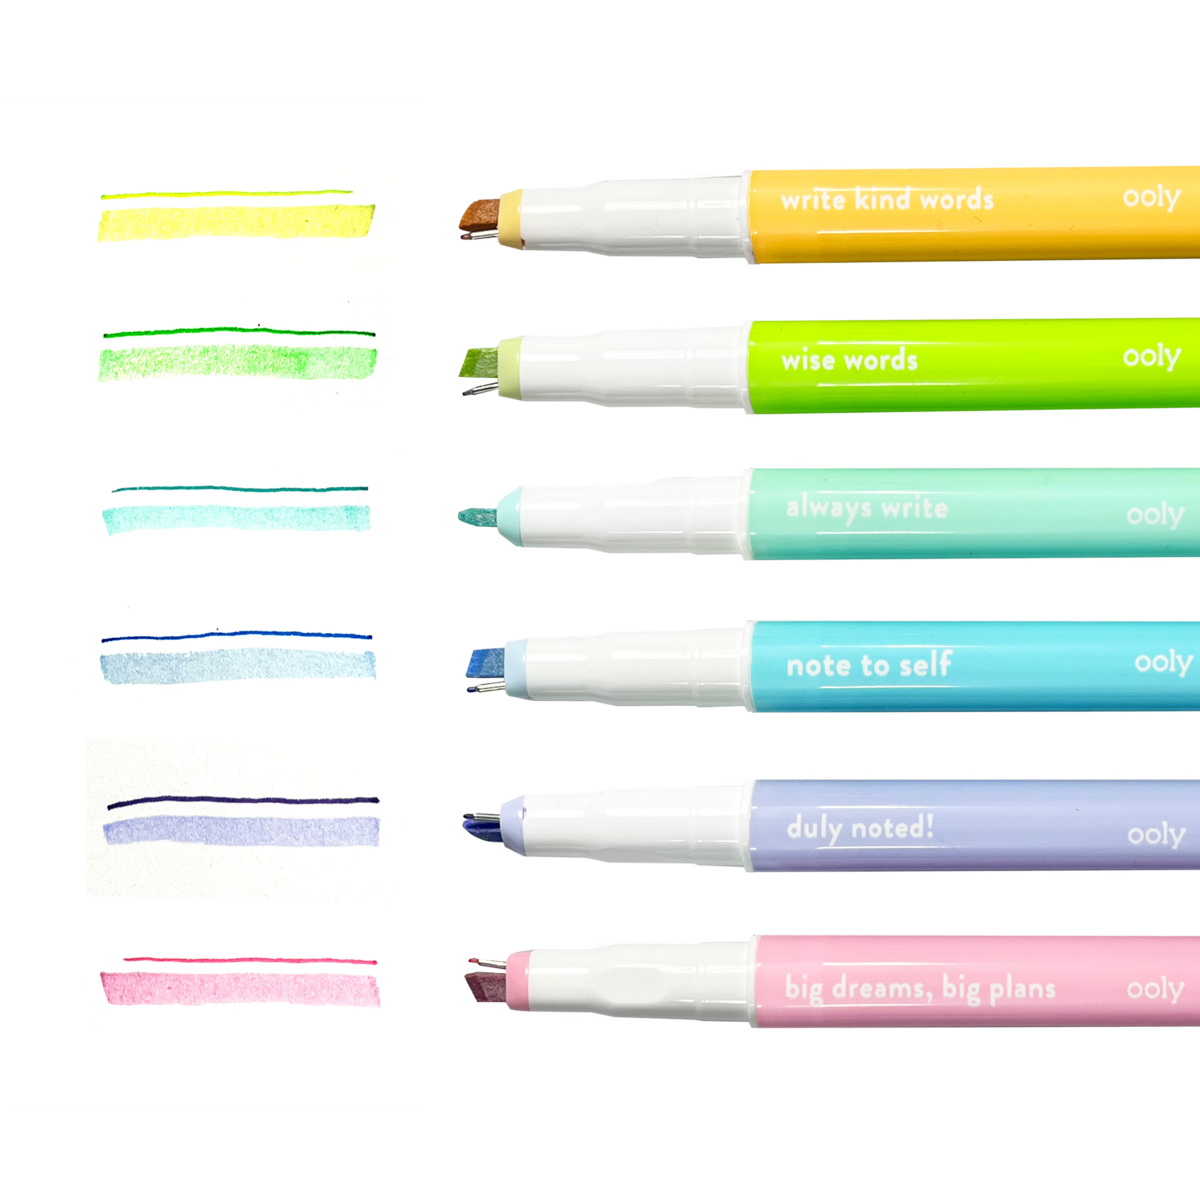 Ooly Yummy Yummy Scented Markers – Modern Natural Baby